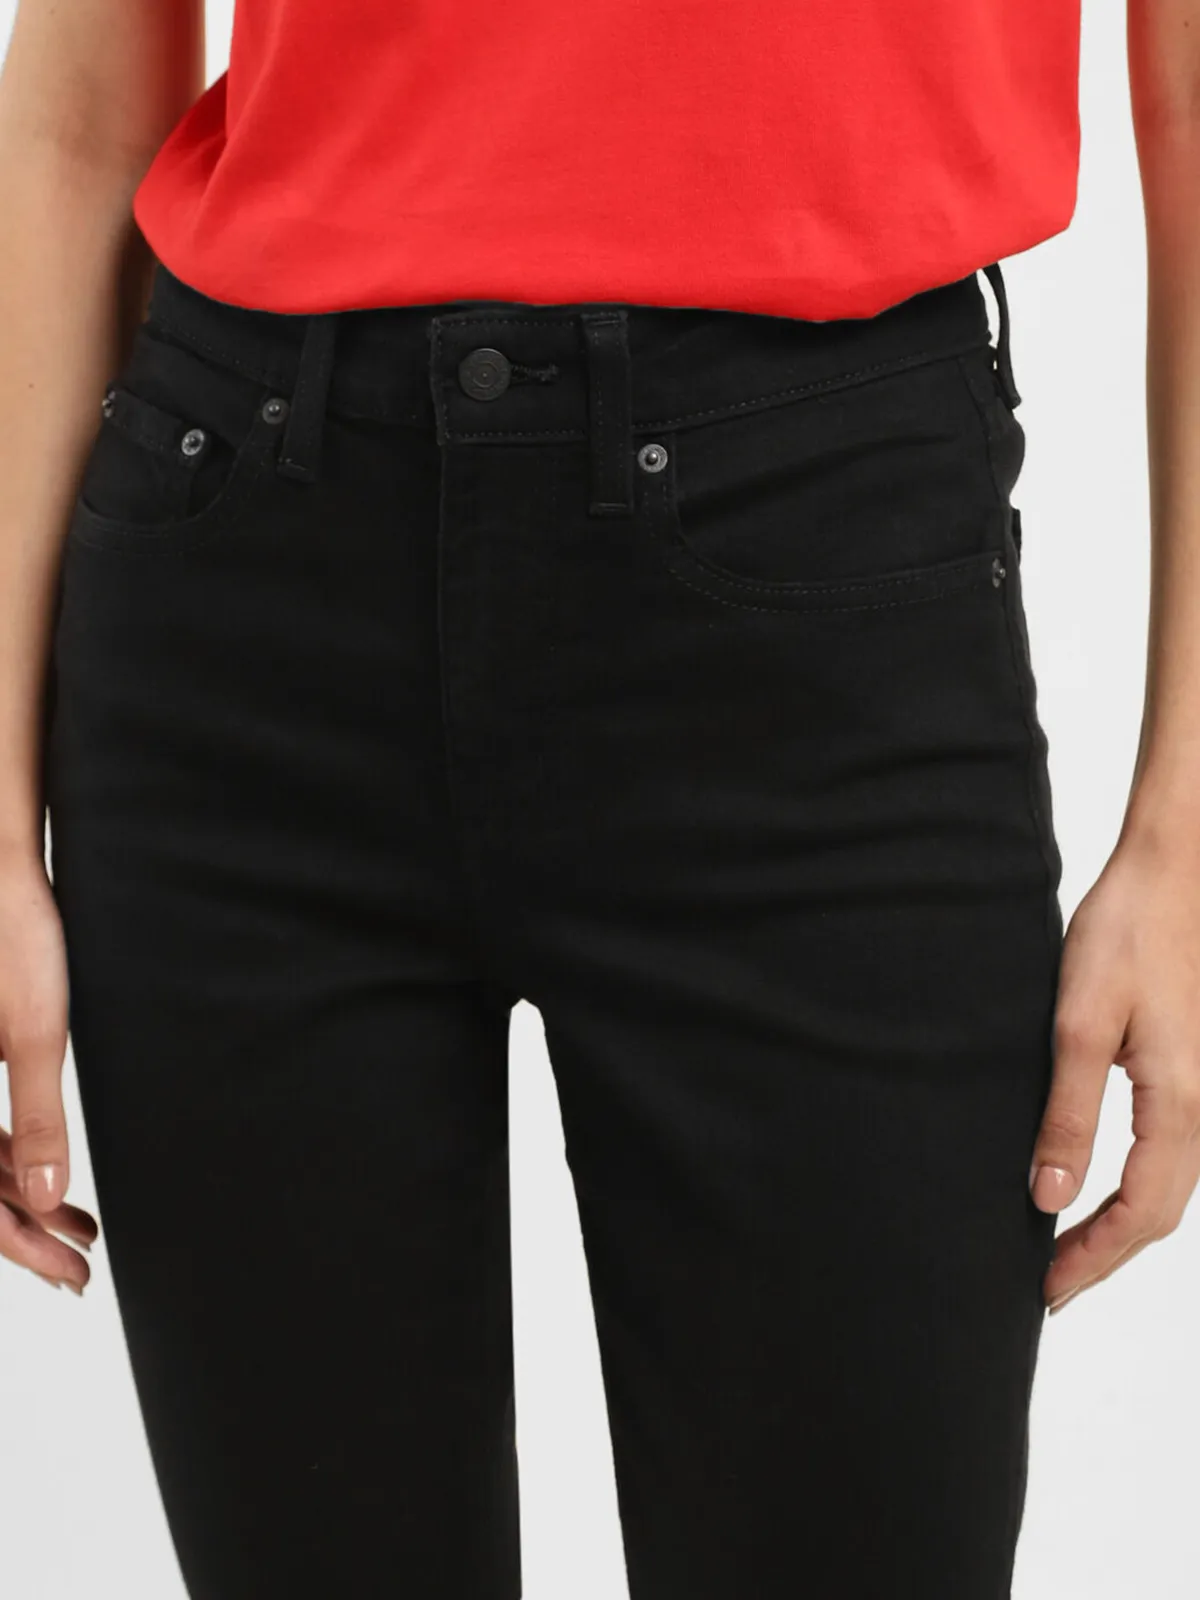 Levis black solid 721 high rise skinny